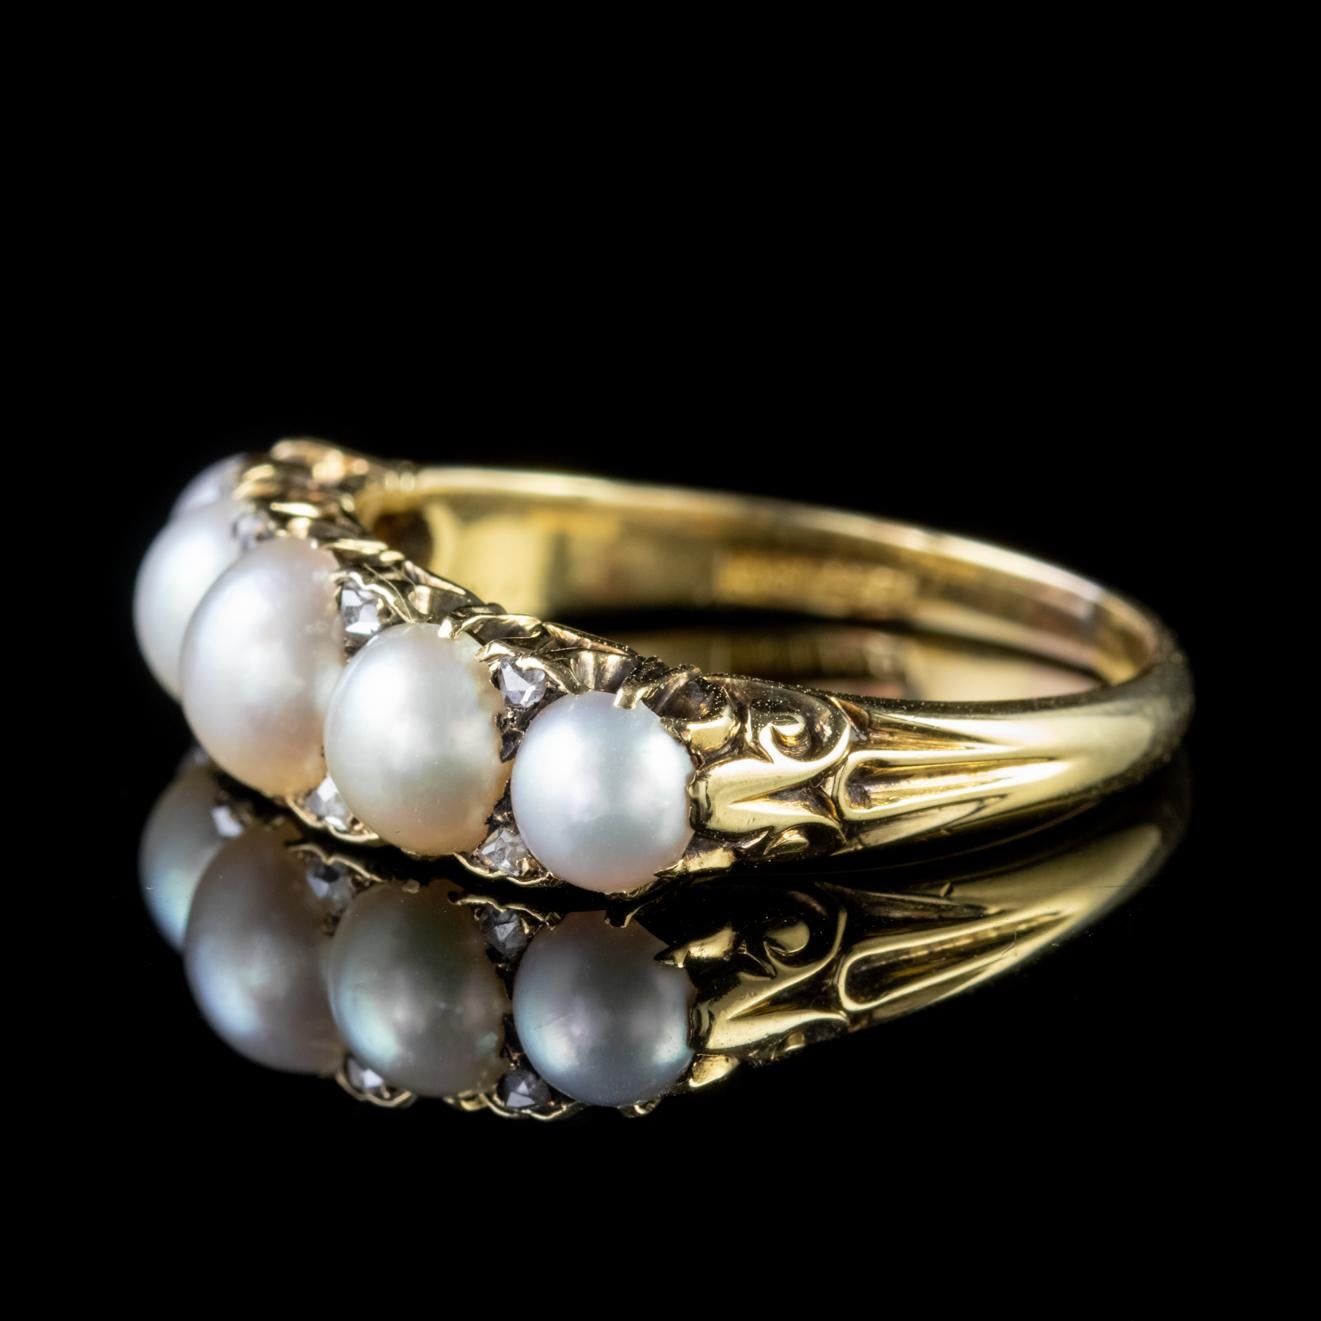 Antique Victorian Pearl Diamond Ring 18ct Gold Circa 1870 In Good Condition For Sale In Lancaster, Lancashire